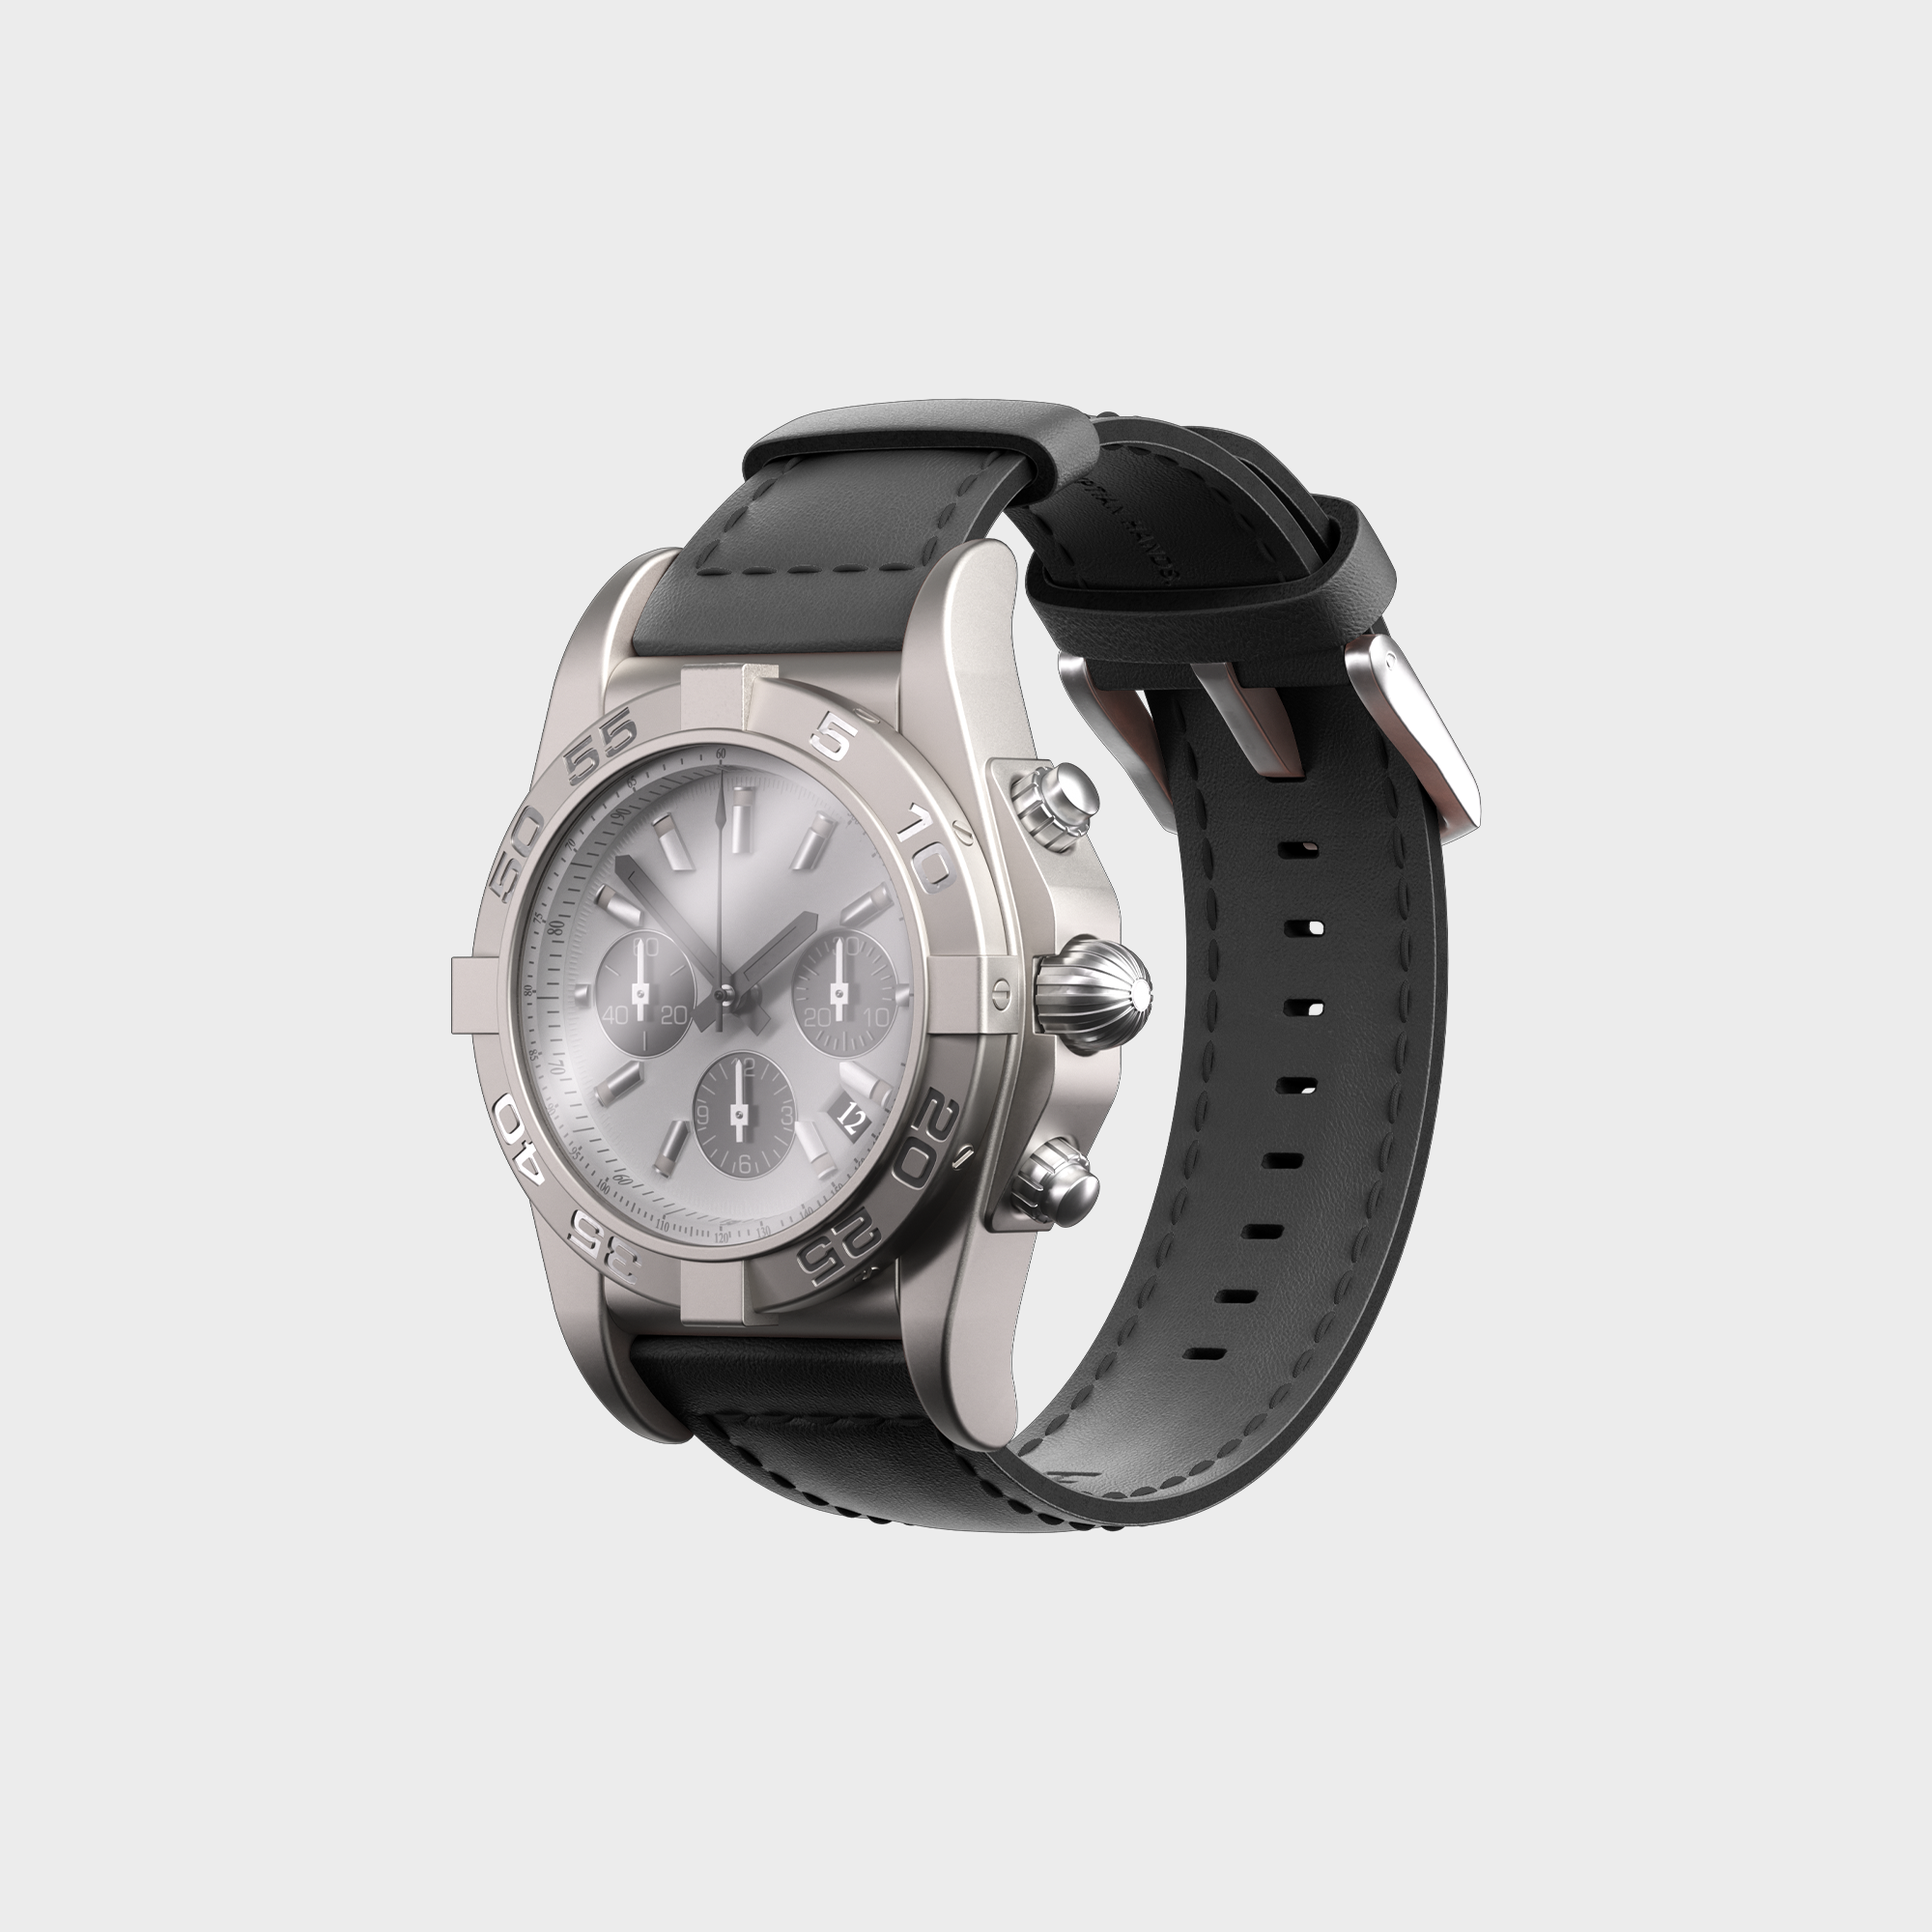 Luxury silver chronograph watch with black leather strap on a white background.